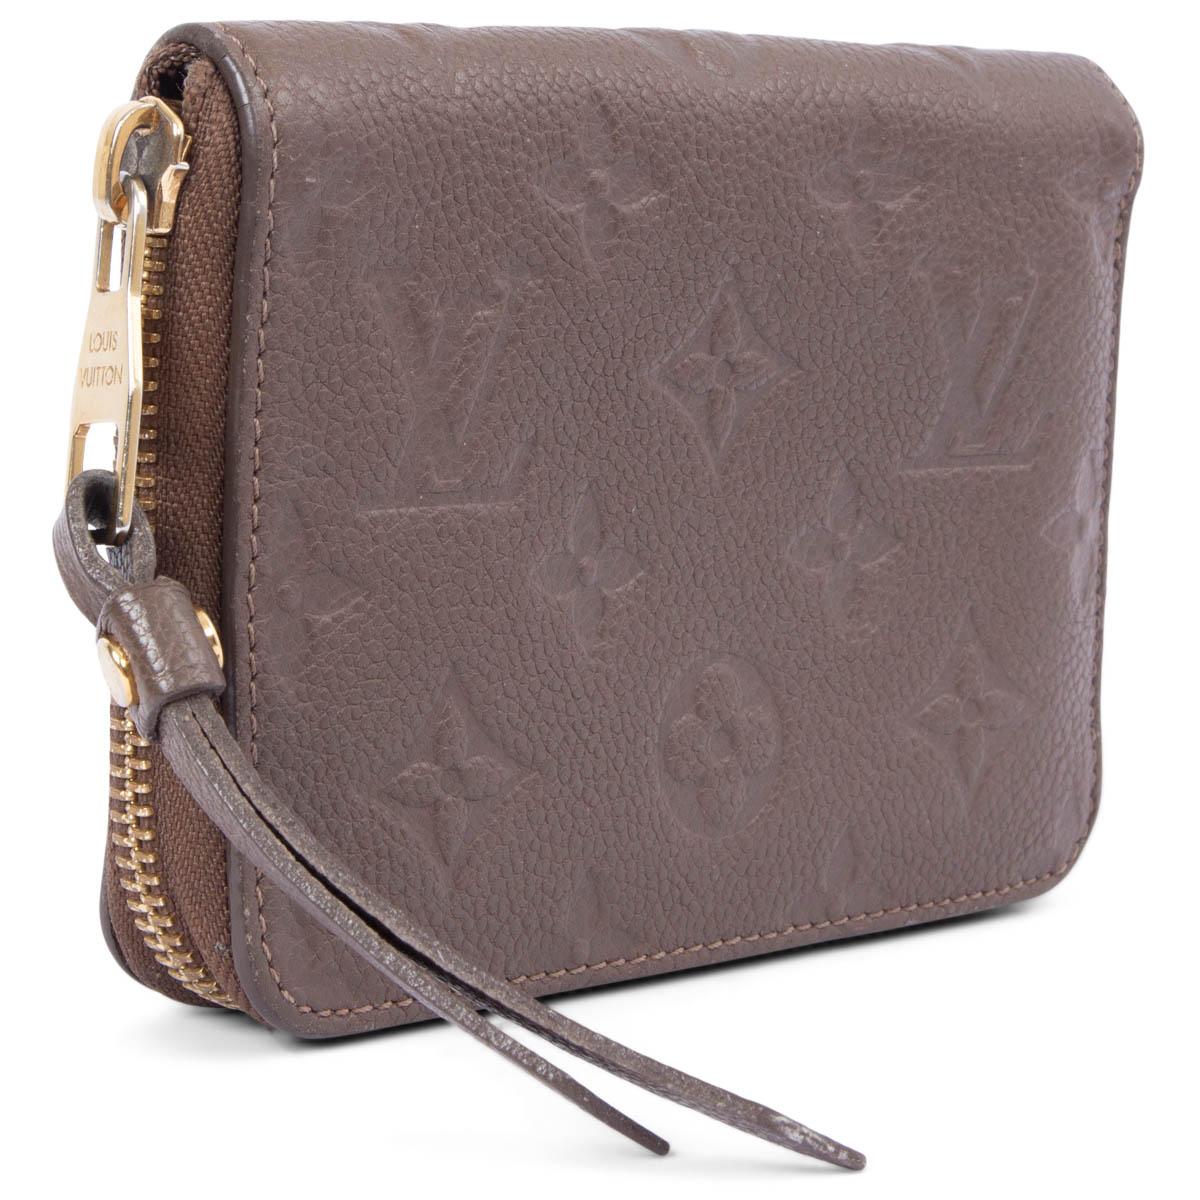 100% authentic Louis Vuitton Secret Compact Wallet in Ombre taupe Monogram Empreinte grained calfskin featuring gold-tone hardware. Opens with a zipper on top and is lined in red calfskin with three credit card slots, a zipped coin-pocket and a